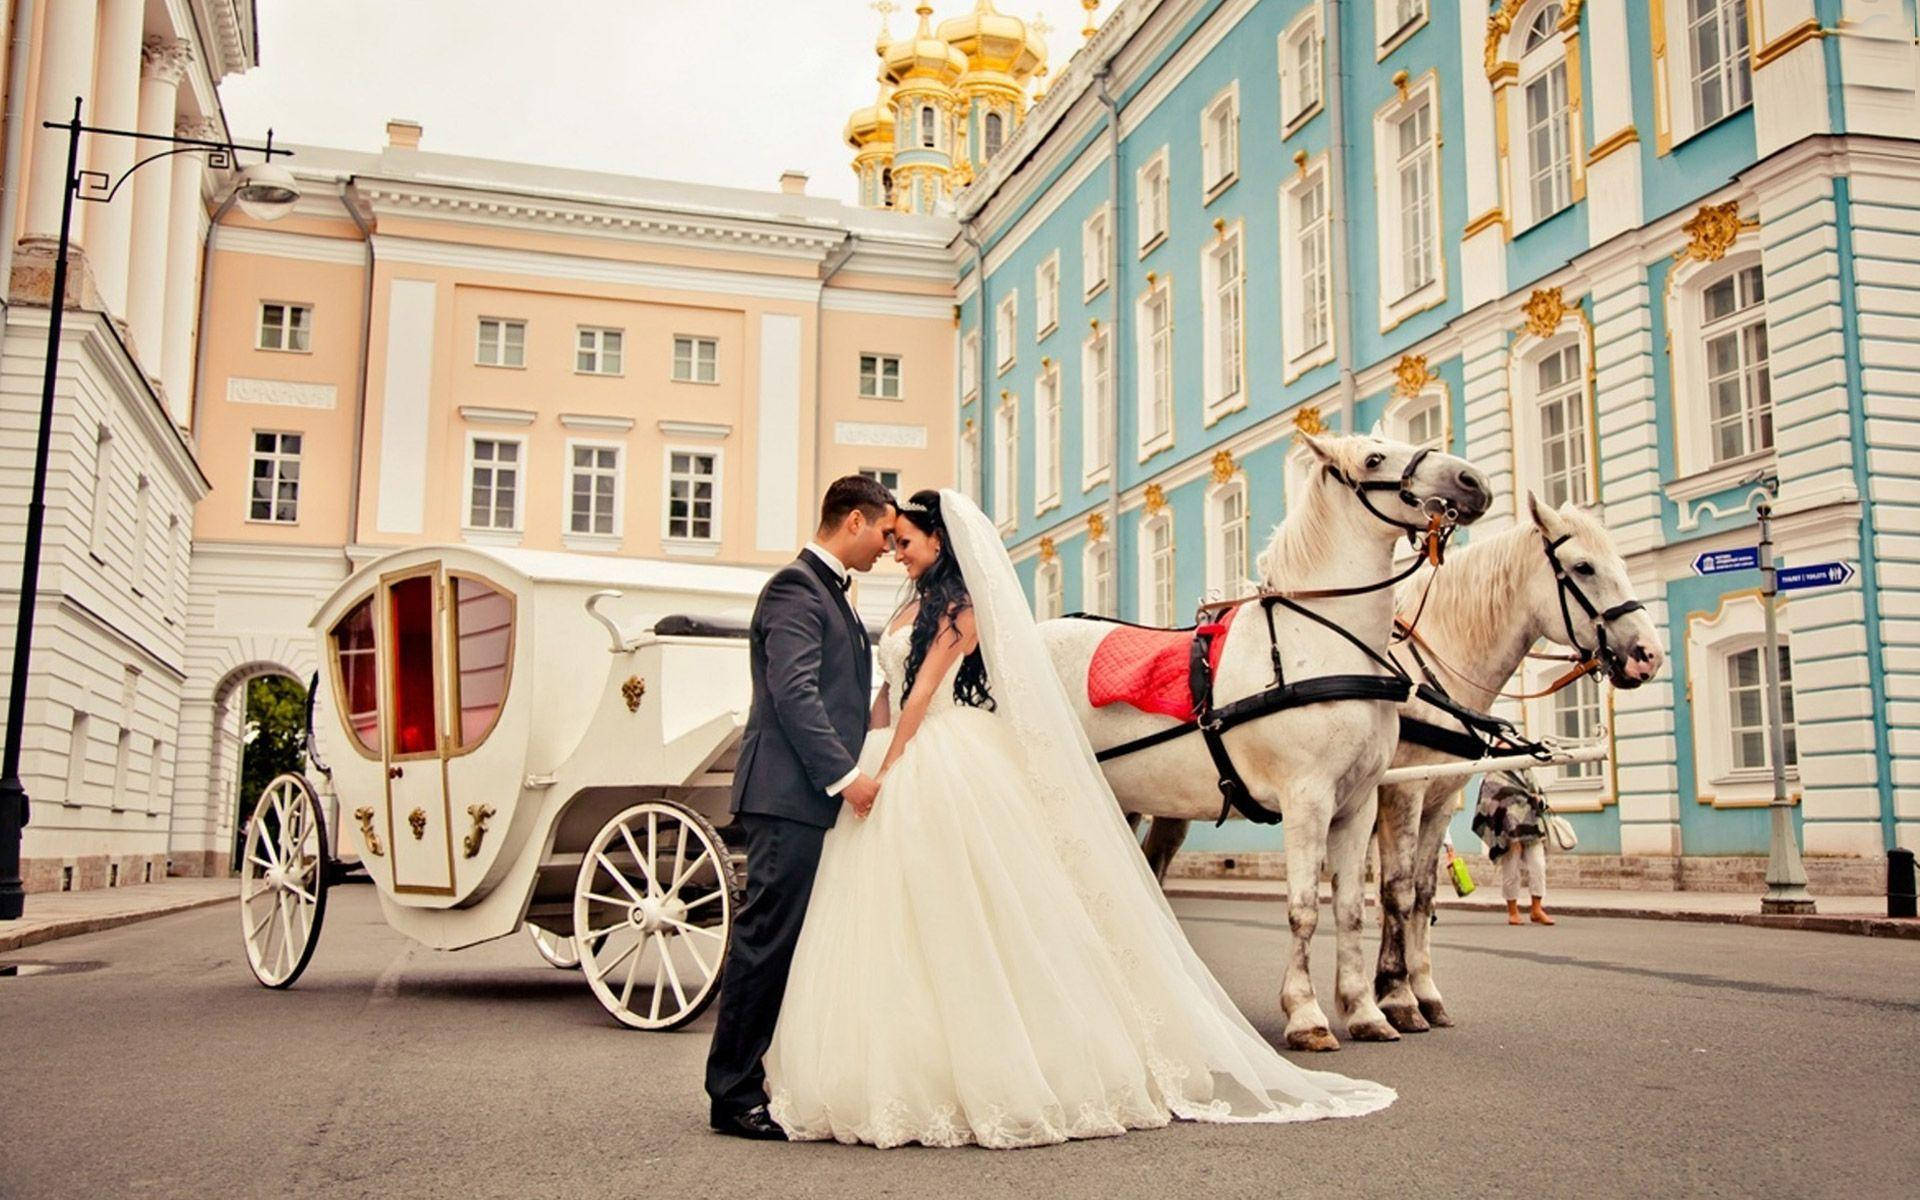 Download Wedding Couple Carriage Wallpaper 